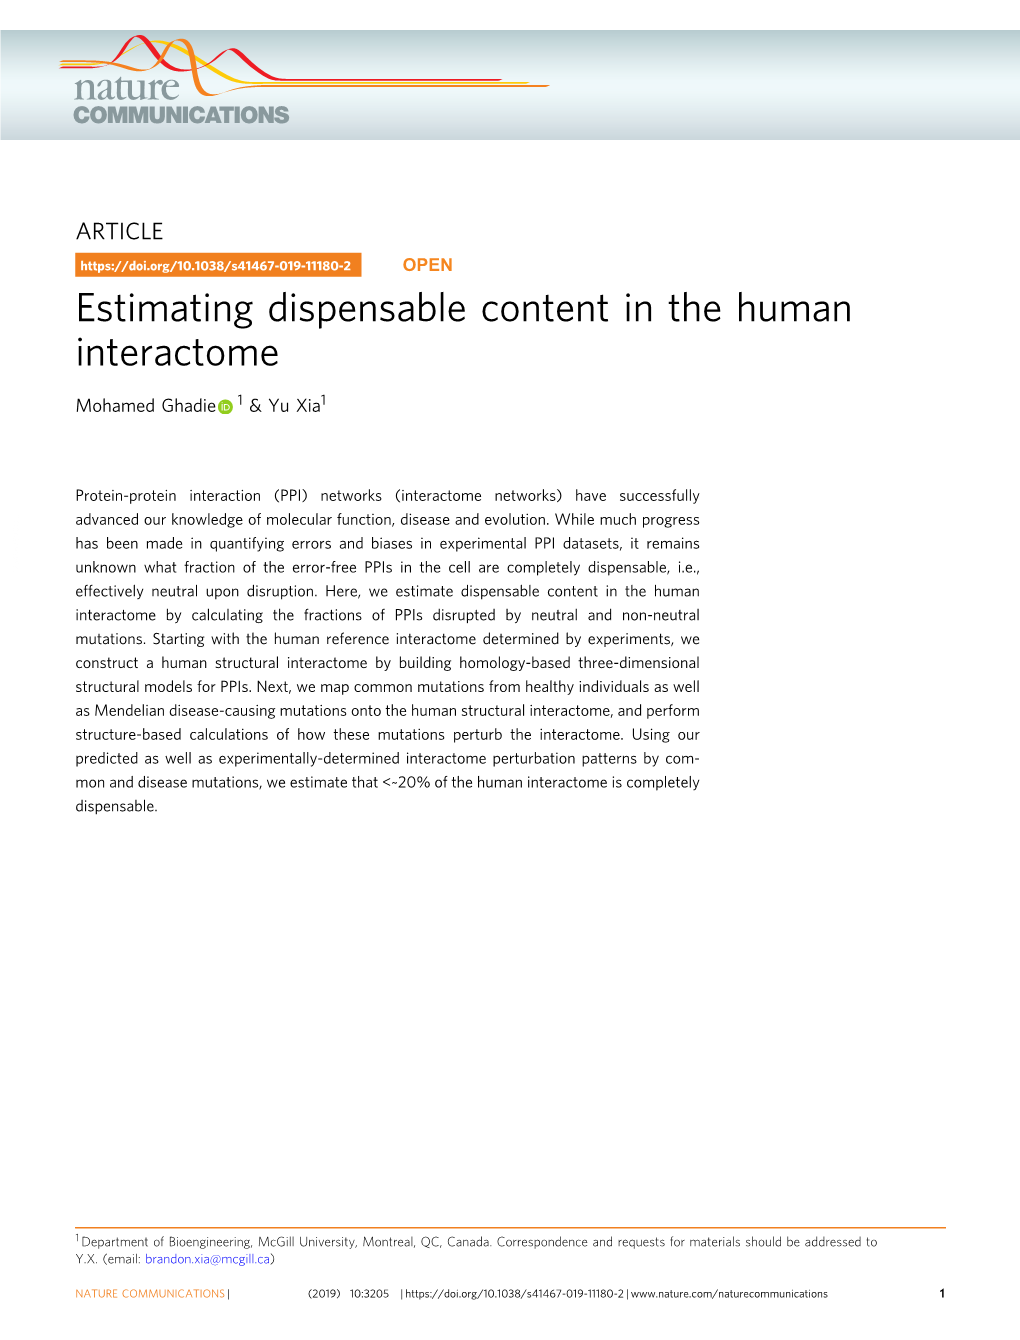 Estimating Dispensable Content in the Human Interactome